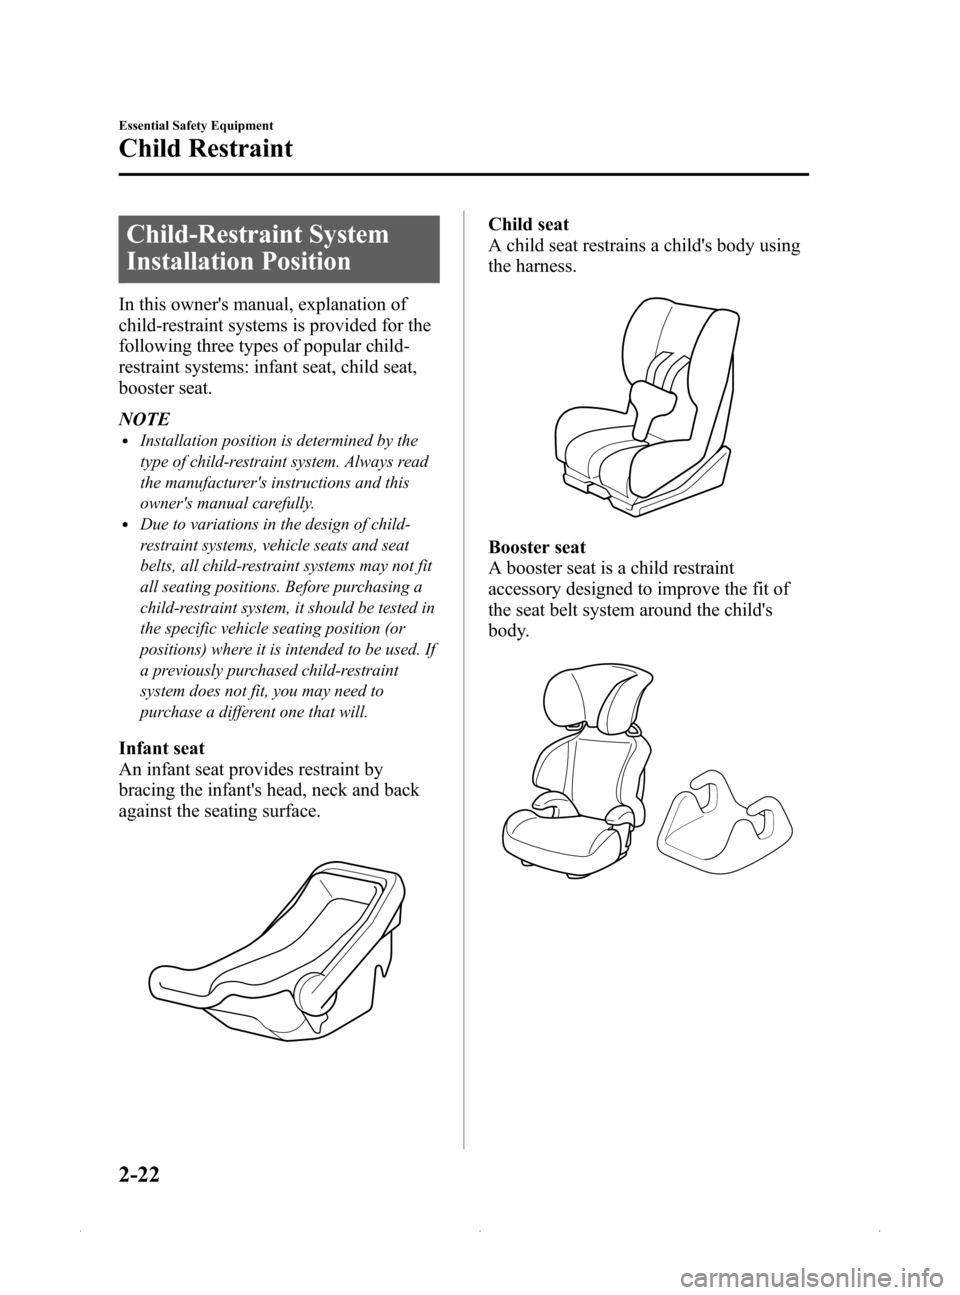 MAZDA MODEL MX-5 PRHT 2015   (in English) Owners Guide Black plate (34,1)
Child-Restraint System
Installation Position
In this owners manual, explanation of
child-restraint systems is provided for the
following three types of popular child-
restraint sys